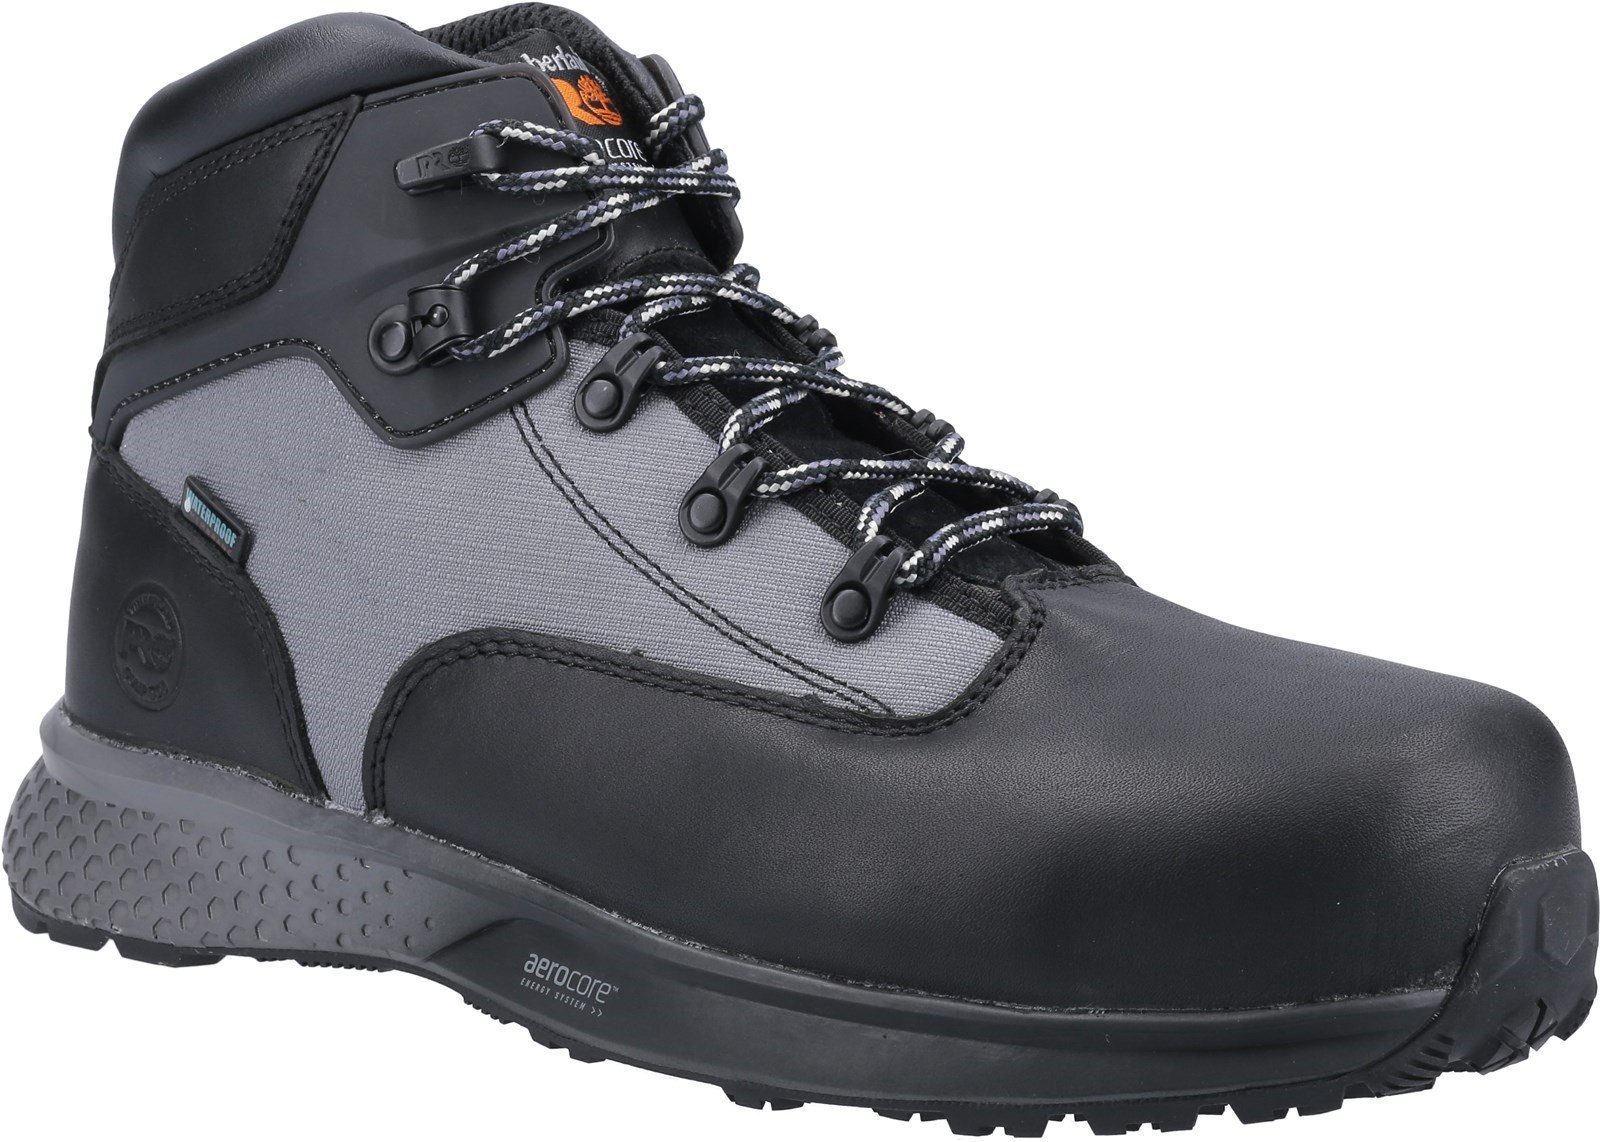 Timberland Pro Unisex Euro Hiker Composite Safety Boot Various Colours 32727 - Black/Grey 6